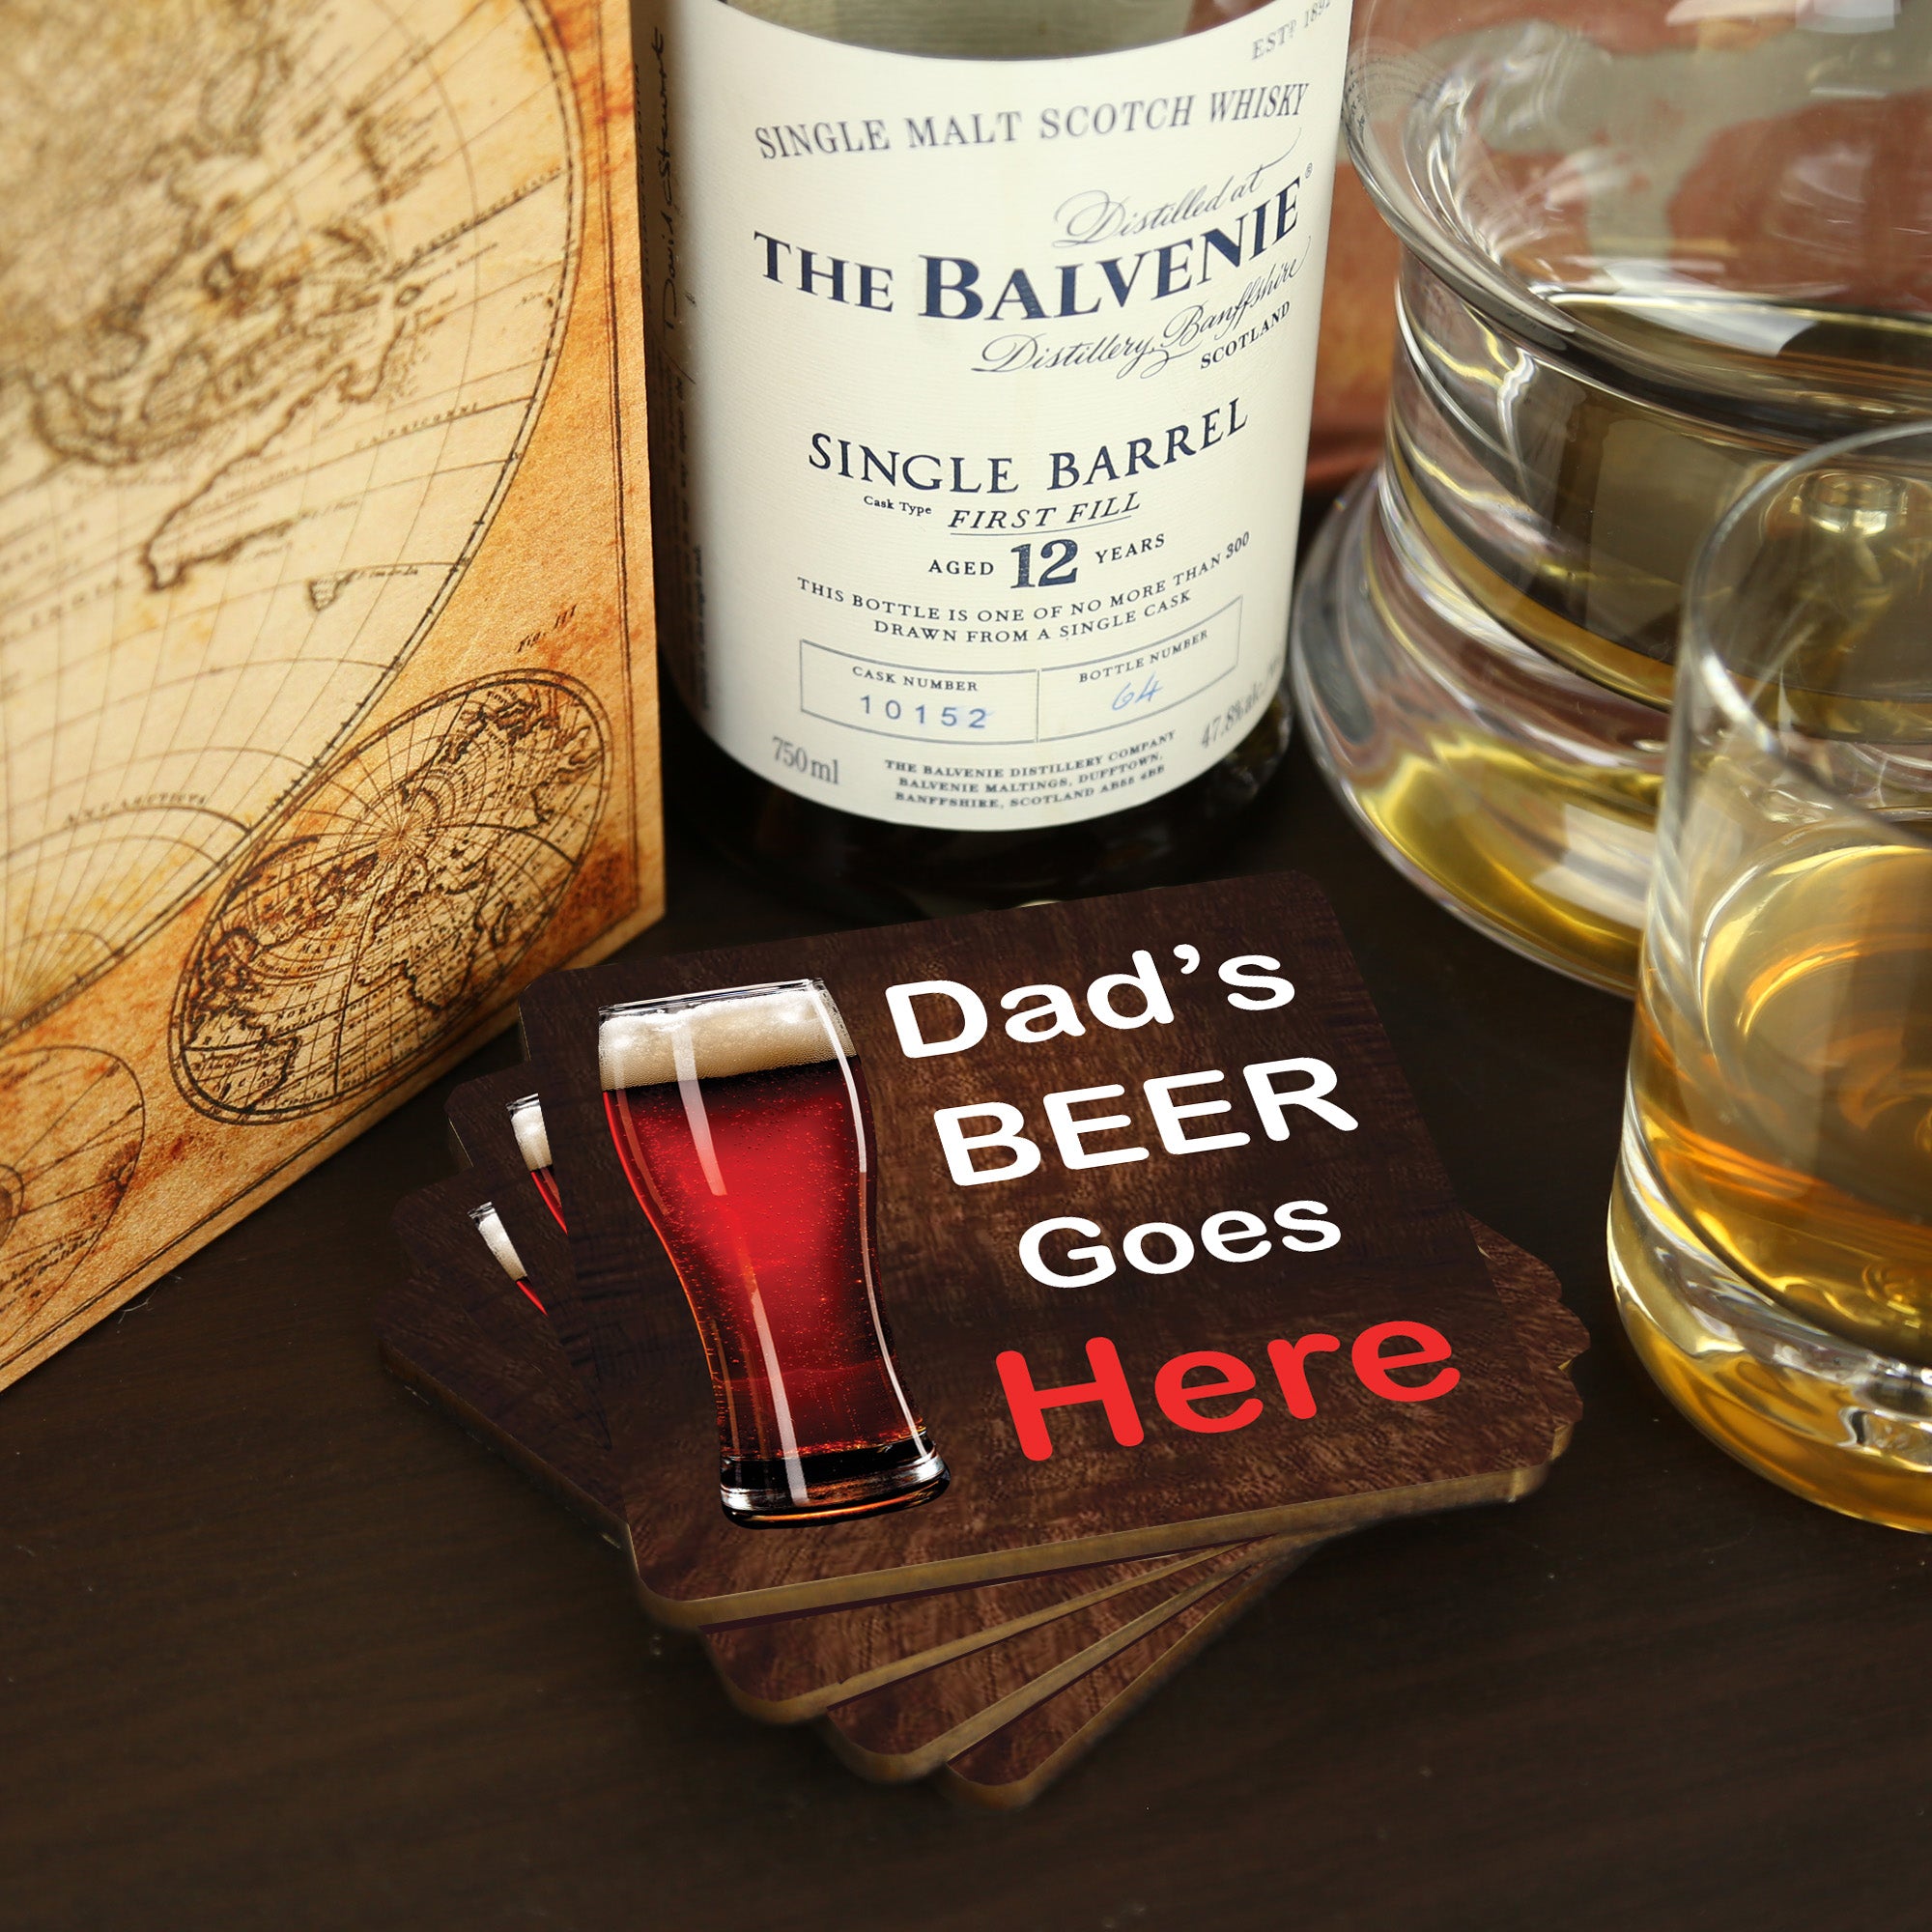 Set of 4 Father's Day Coasters- Dad's Beer Goes Here